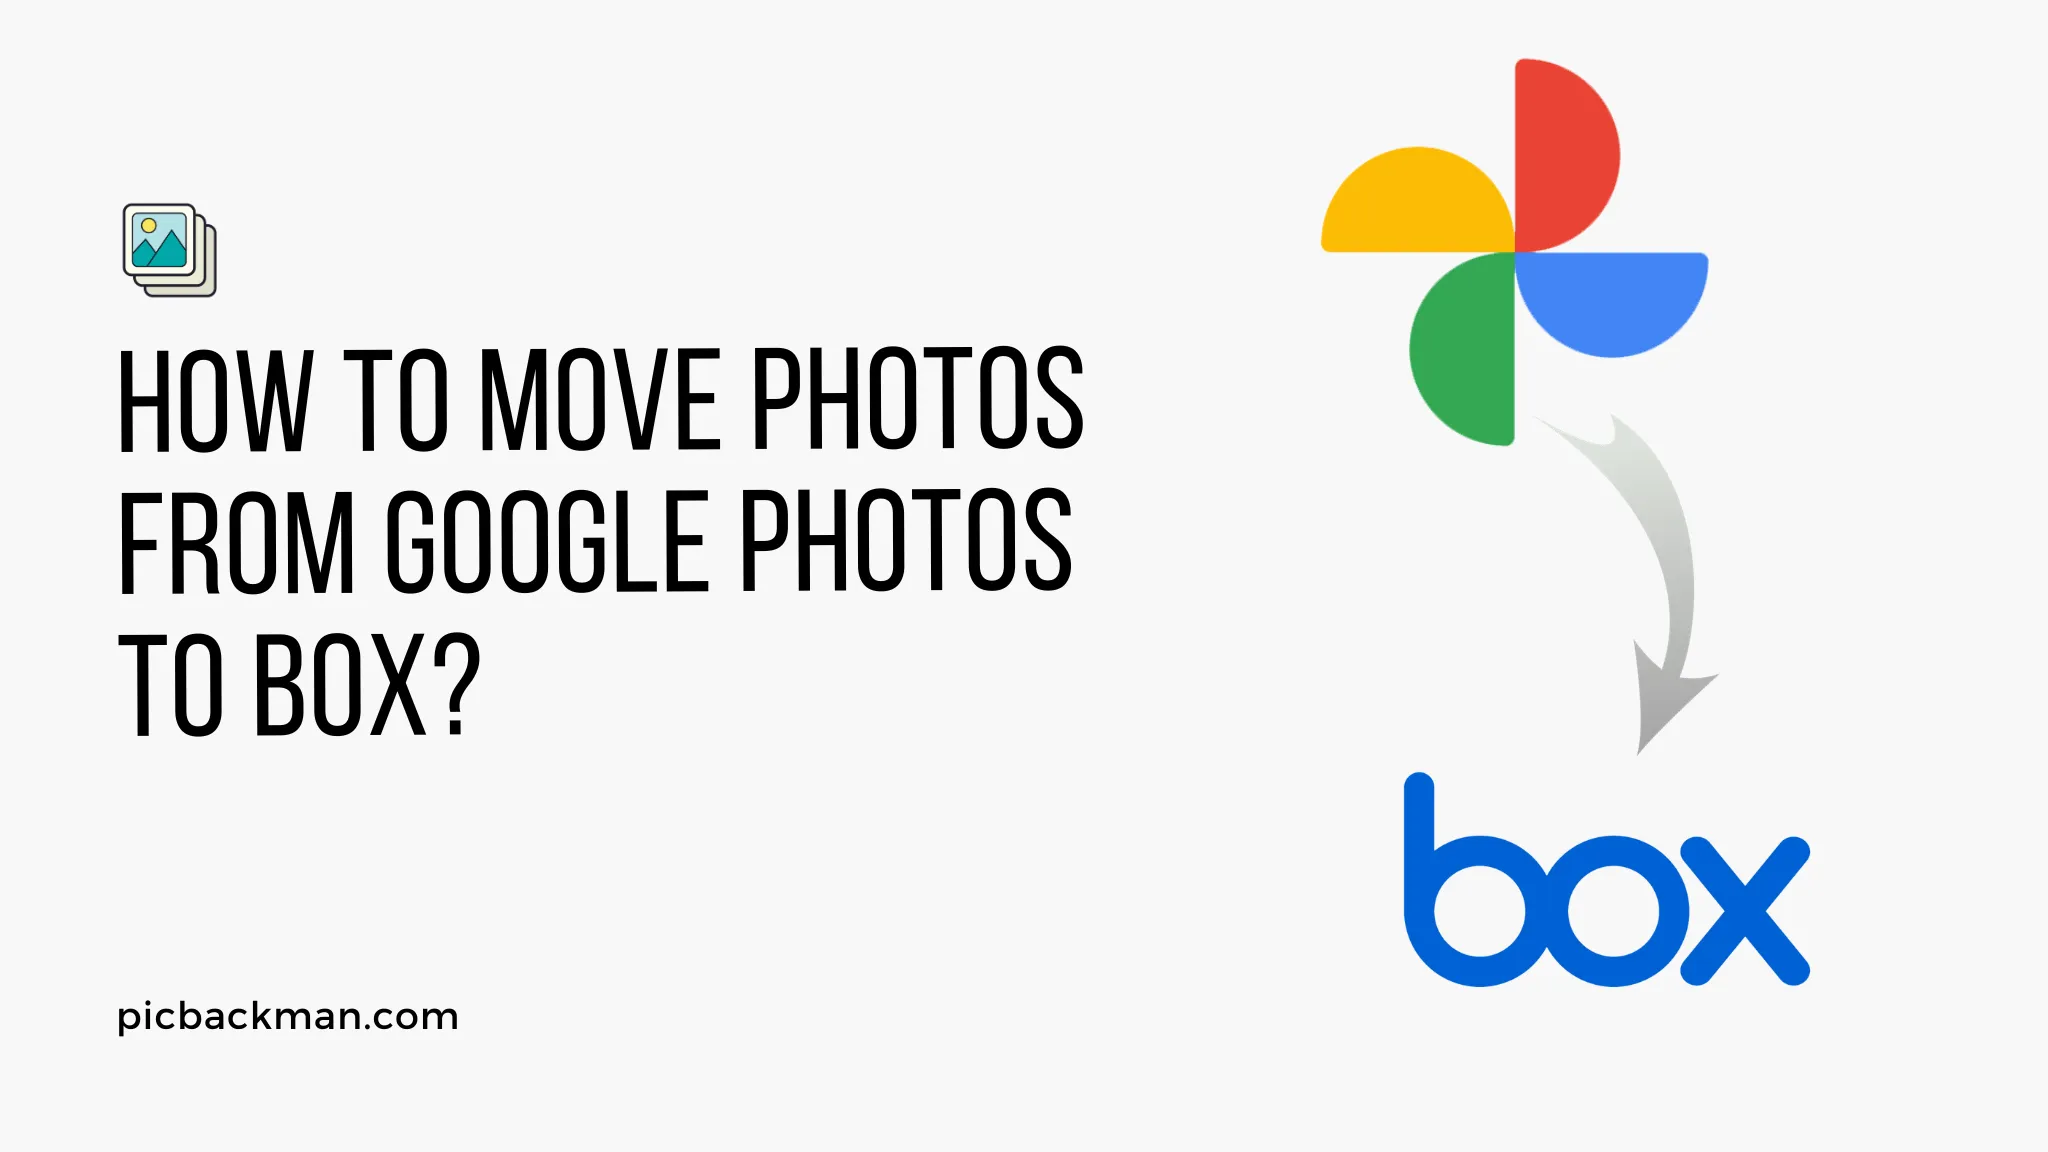 How to Move Photos from Google Photos to Box?